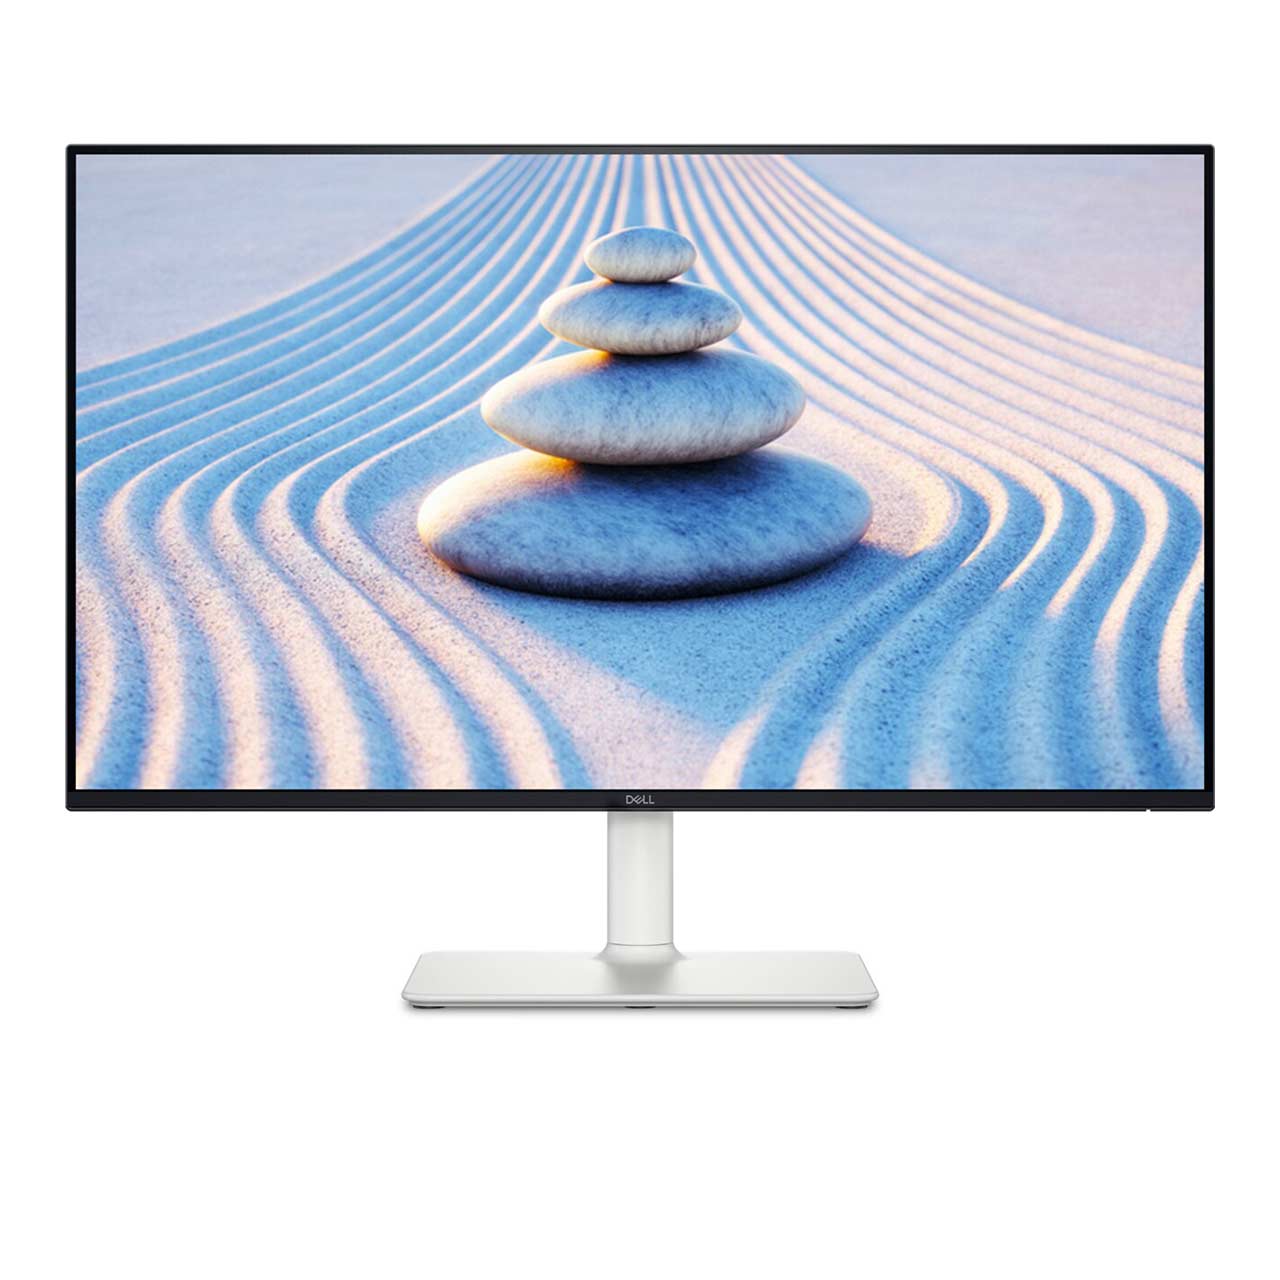 Dell 27 Monitor - S2725HS